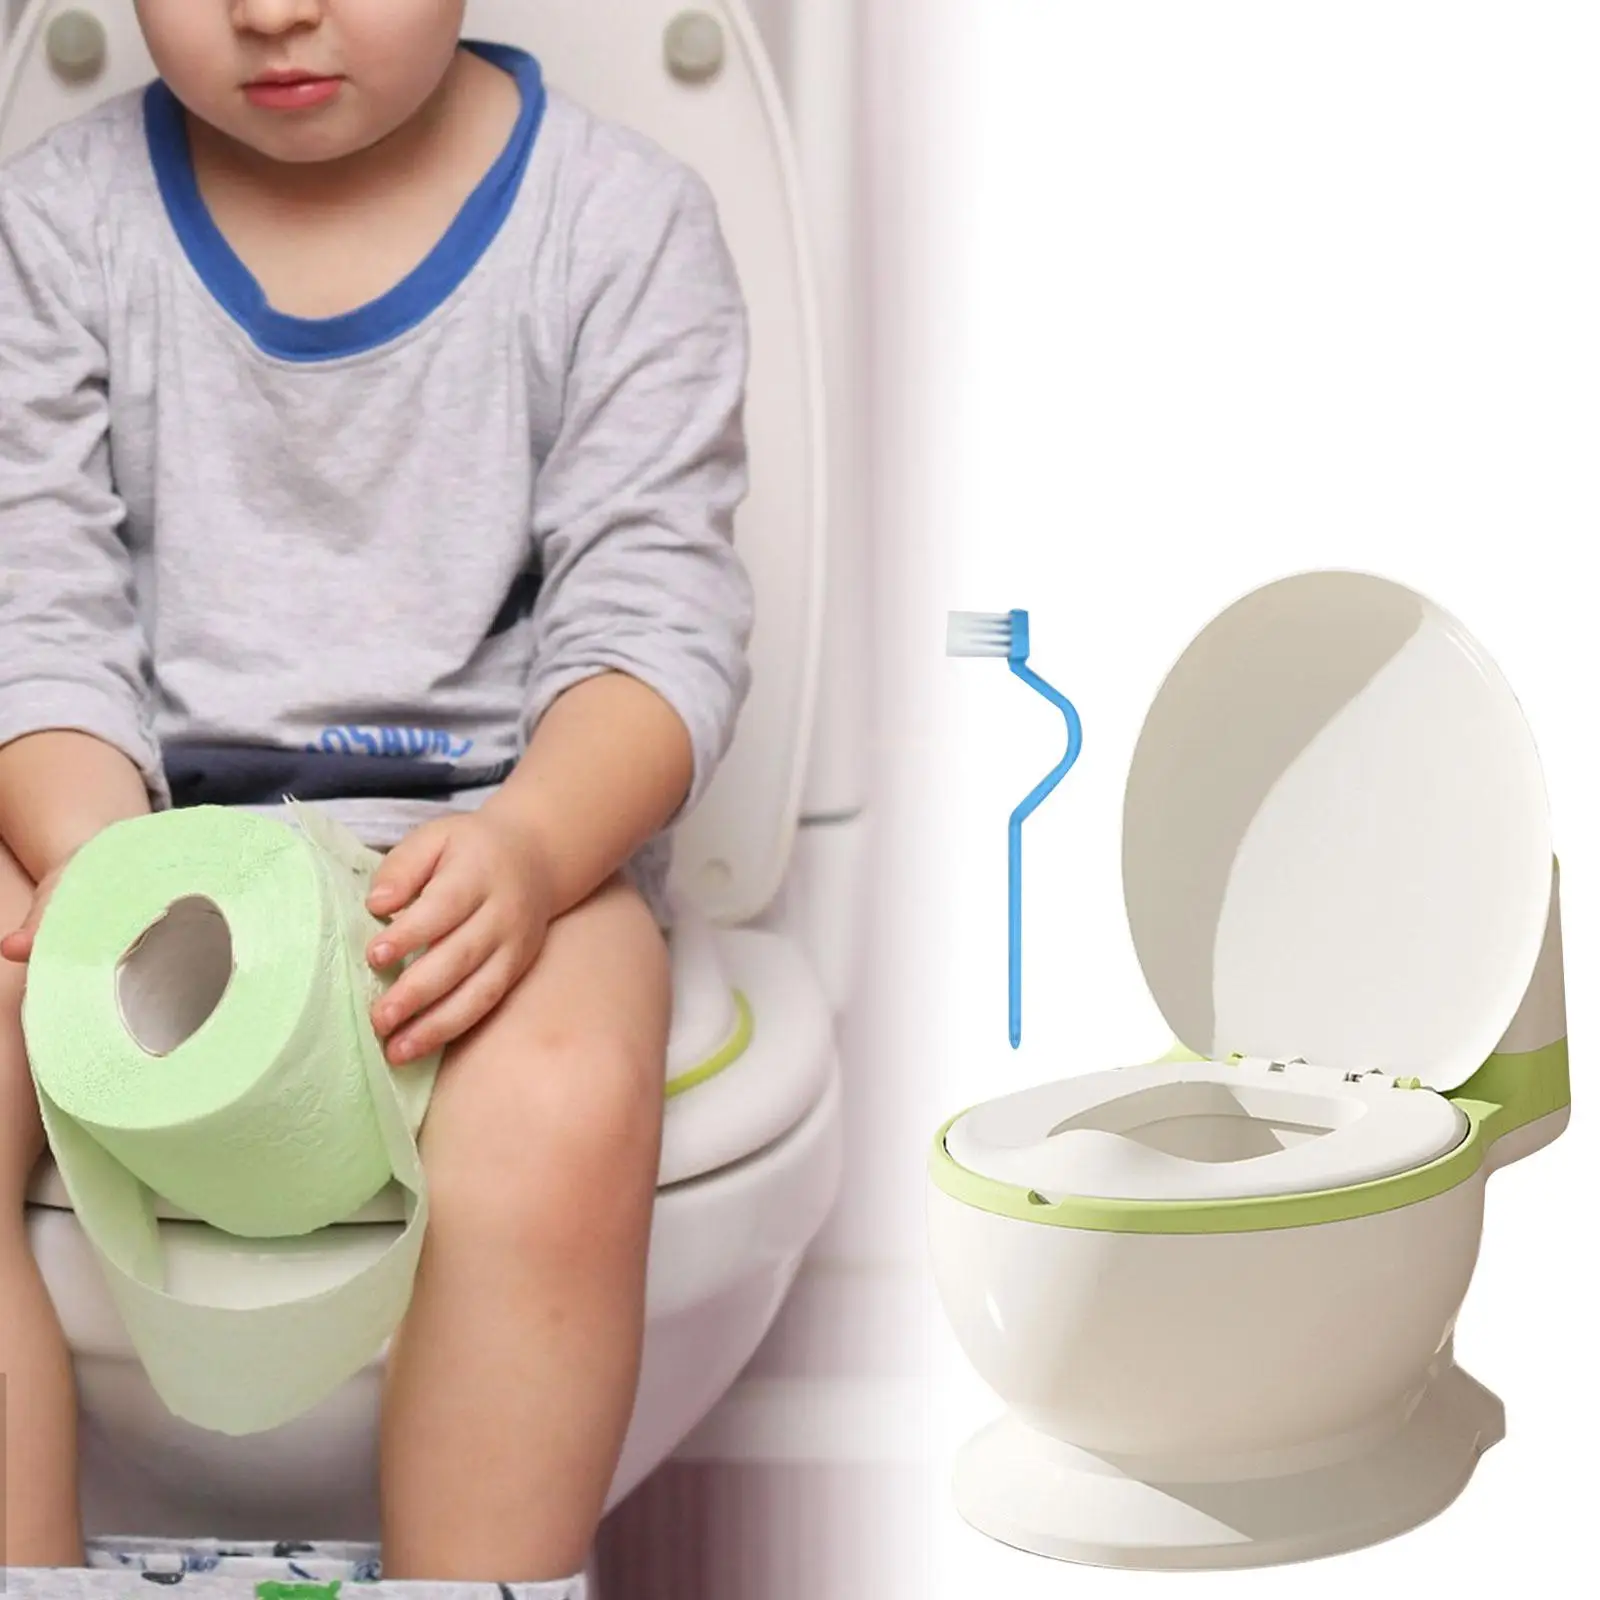 Baby Potty Toilet Comfortable Includes Cleaning Brush Training Transition Potty Seat Real Feel Potty for Bedroom Babies Infants